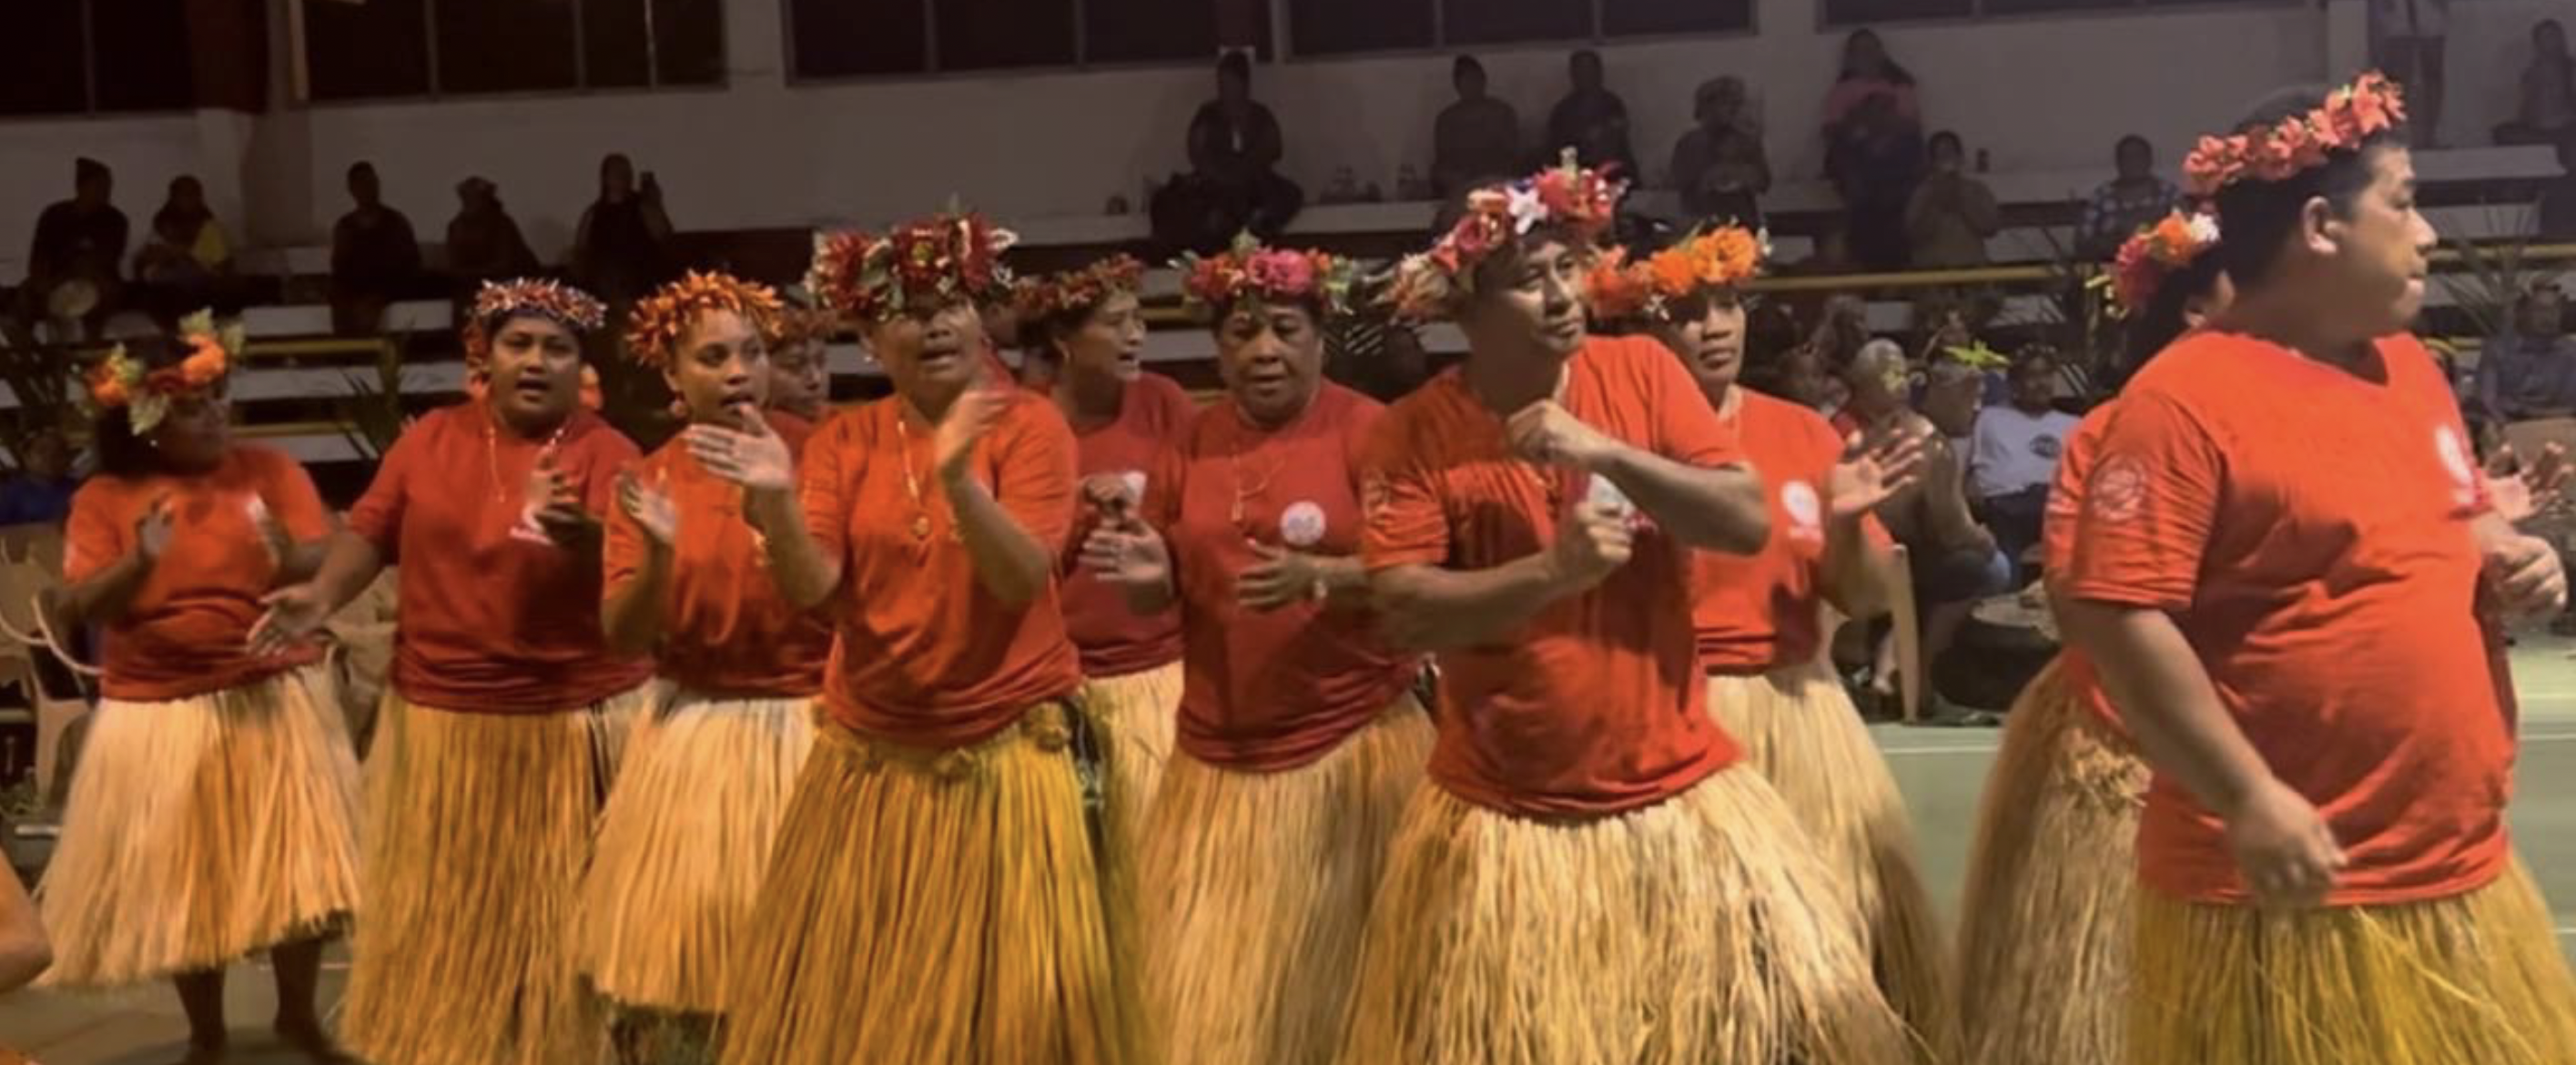 Pohnpei participants dance their way to the stage for their cultural presentation during the 2023 MTEC in Kosrae, FSM.